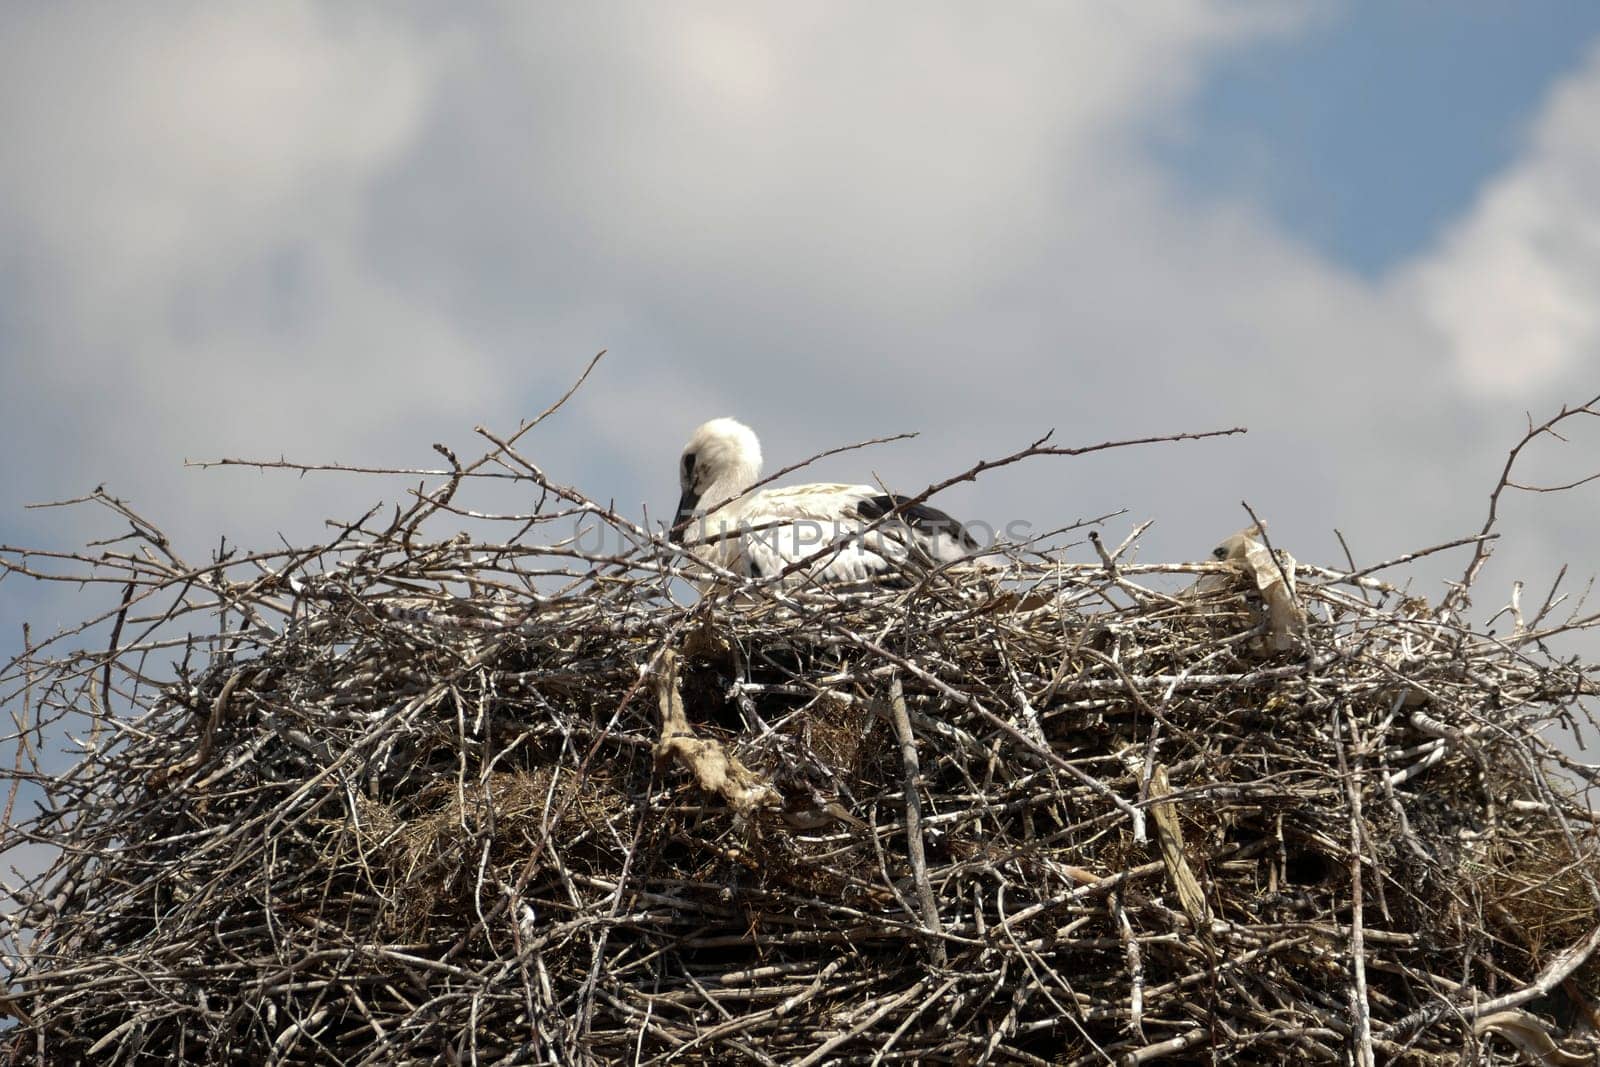 natural stork nest and baby stork lying in it, by nhatipoglu